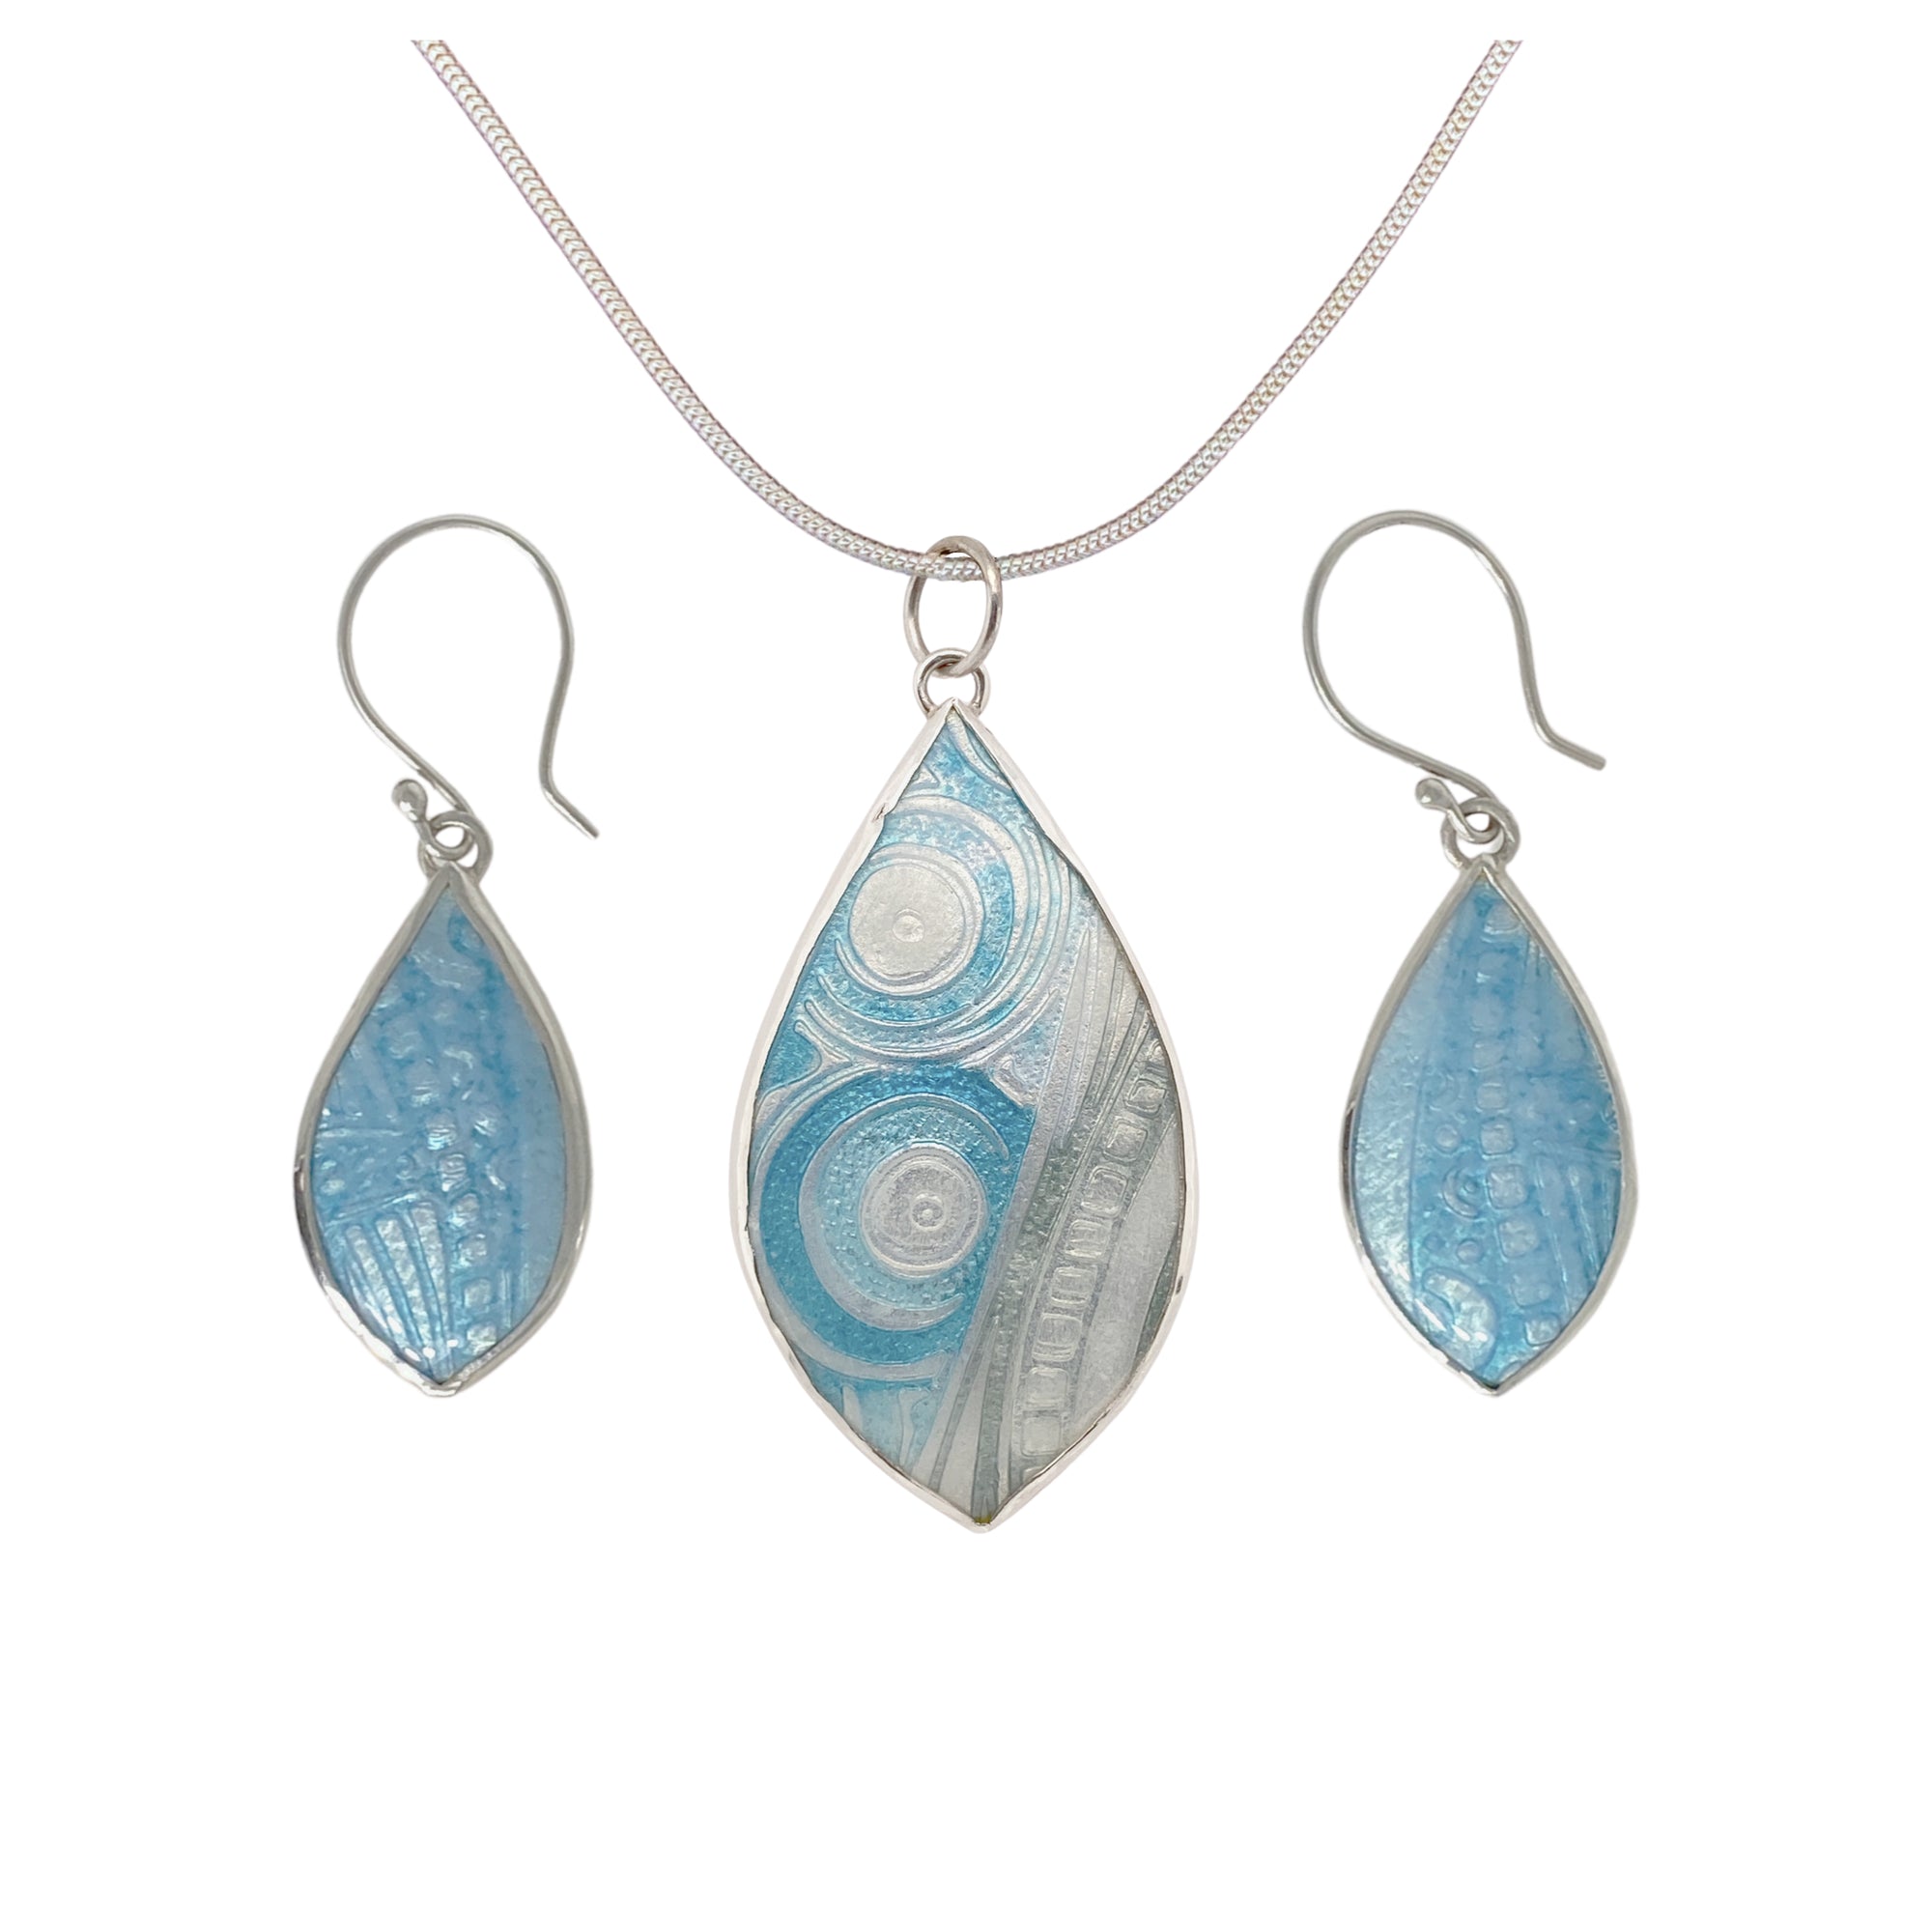 Camille Patton Pearly Blue Cosmos Jewelry Set S01